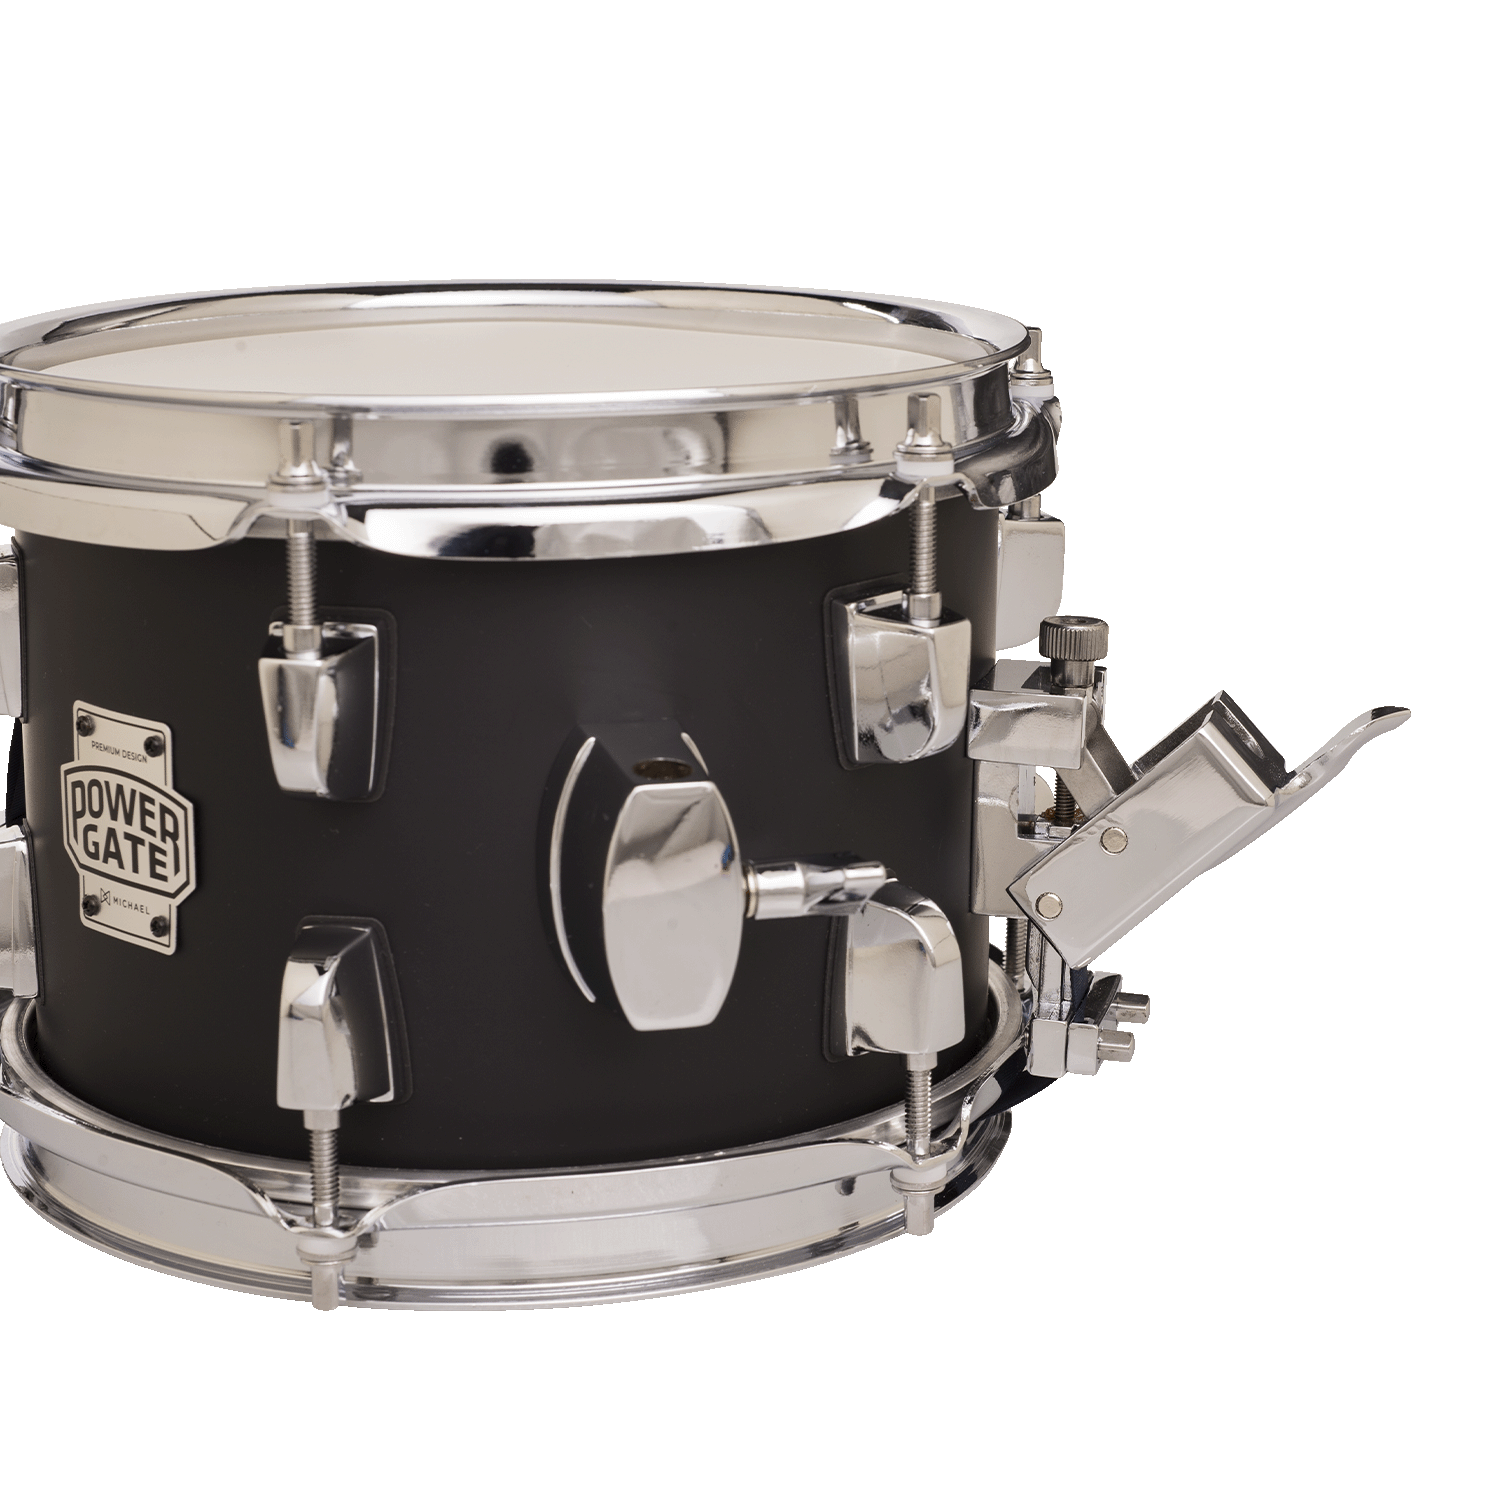 SNARE  MICHAEL POWERGATE STAGE PGS0806 JBK 08x06